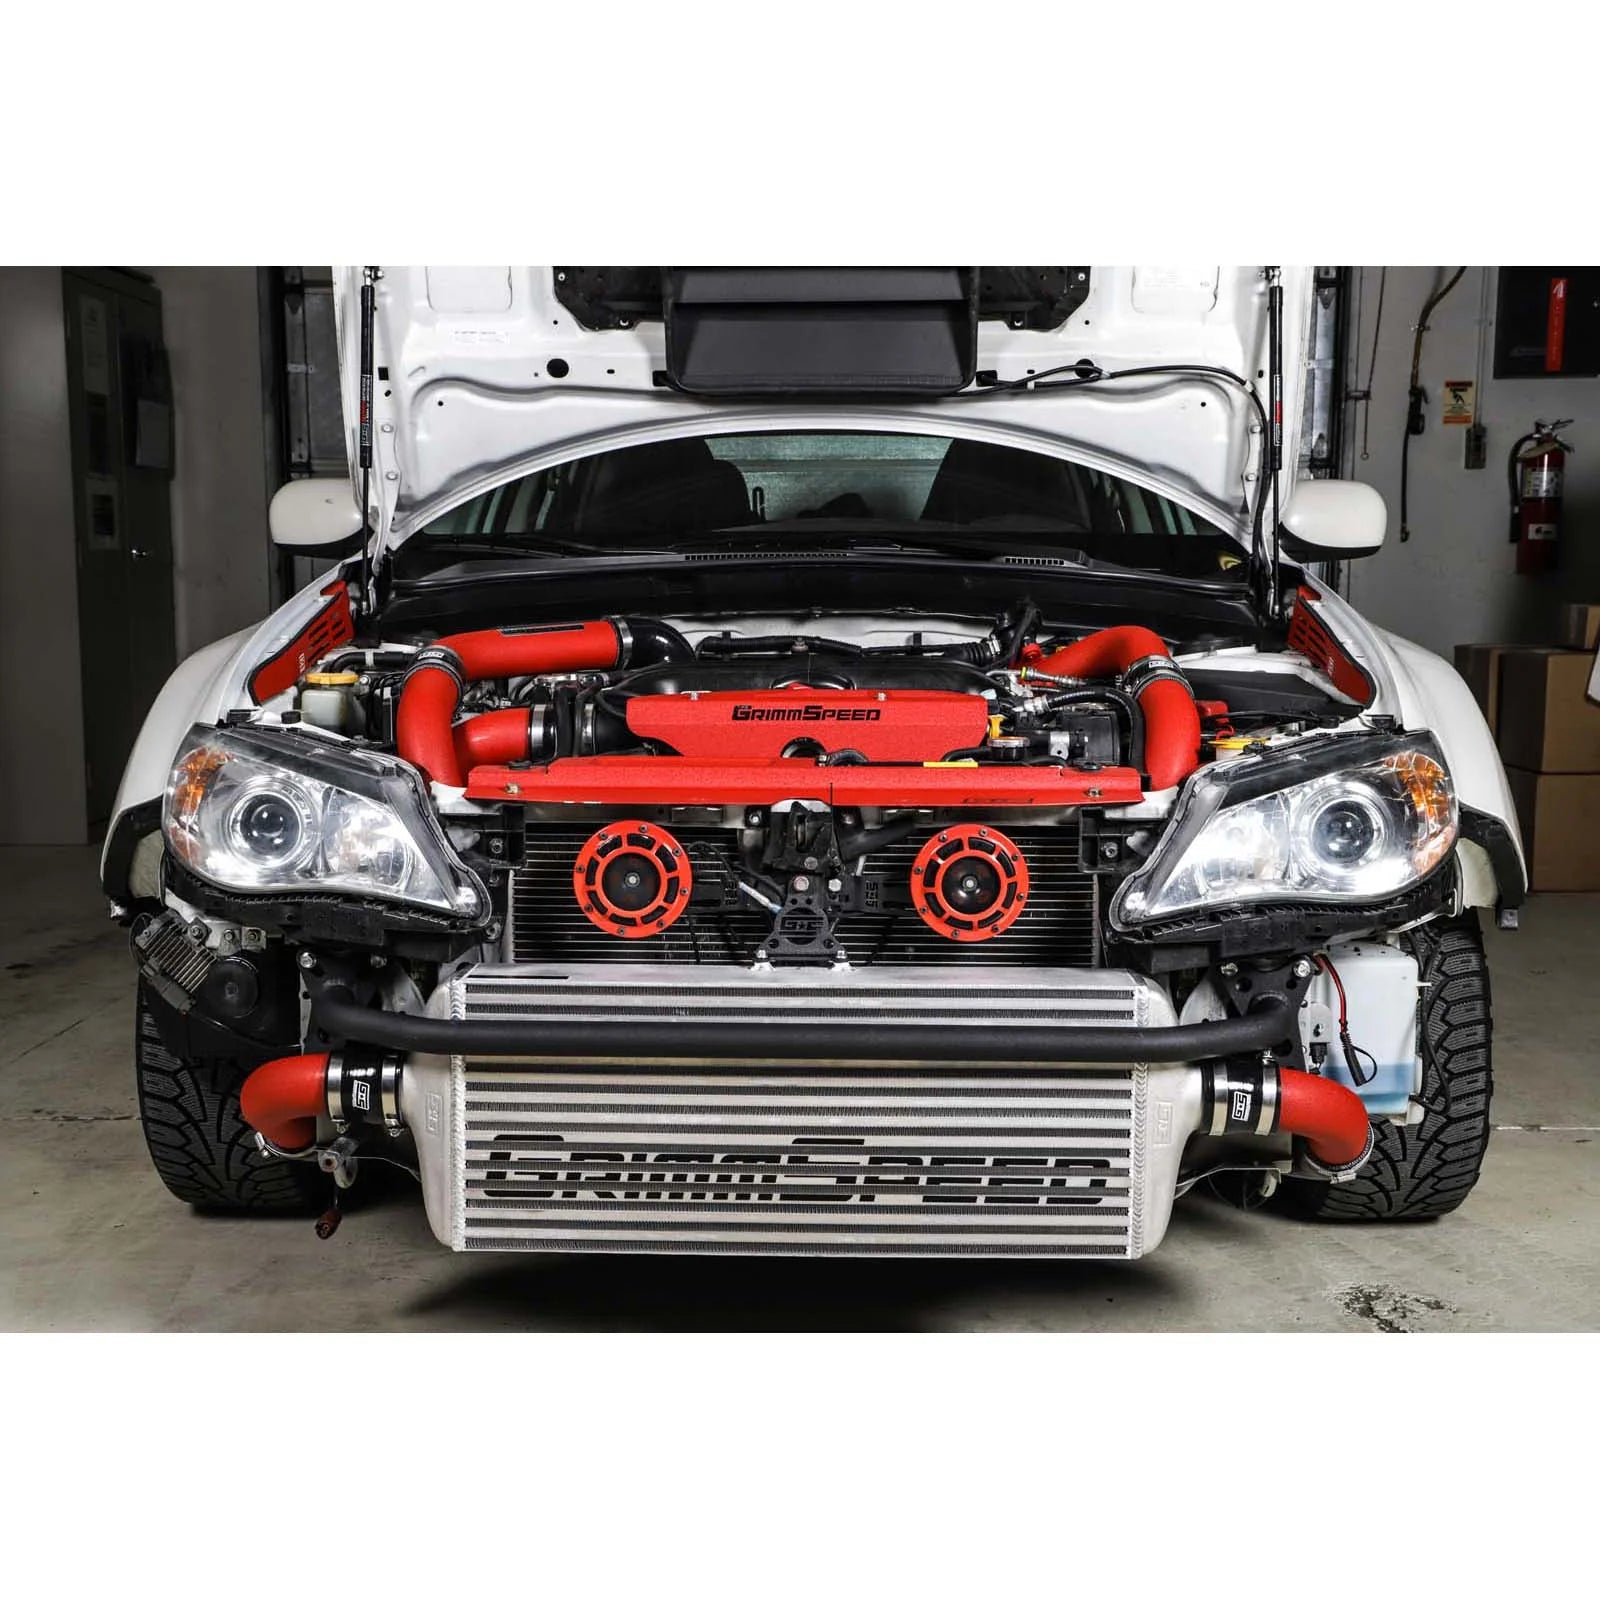 GrimmSpeed Front Mount Intercooler Kit - Raw Core with Red Piping - 2008-14 Subaru WRX